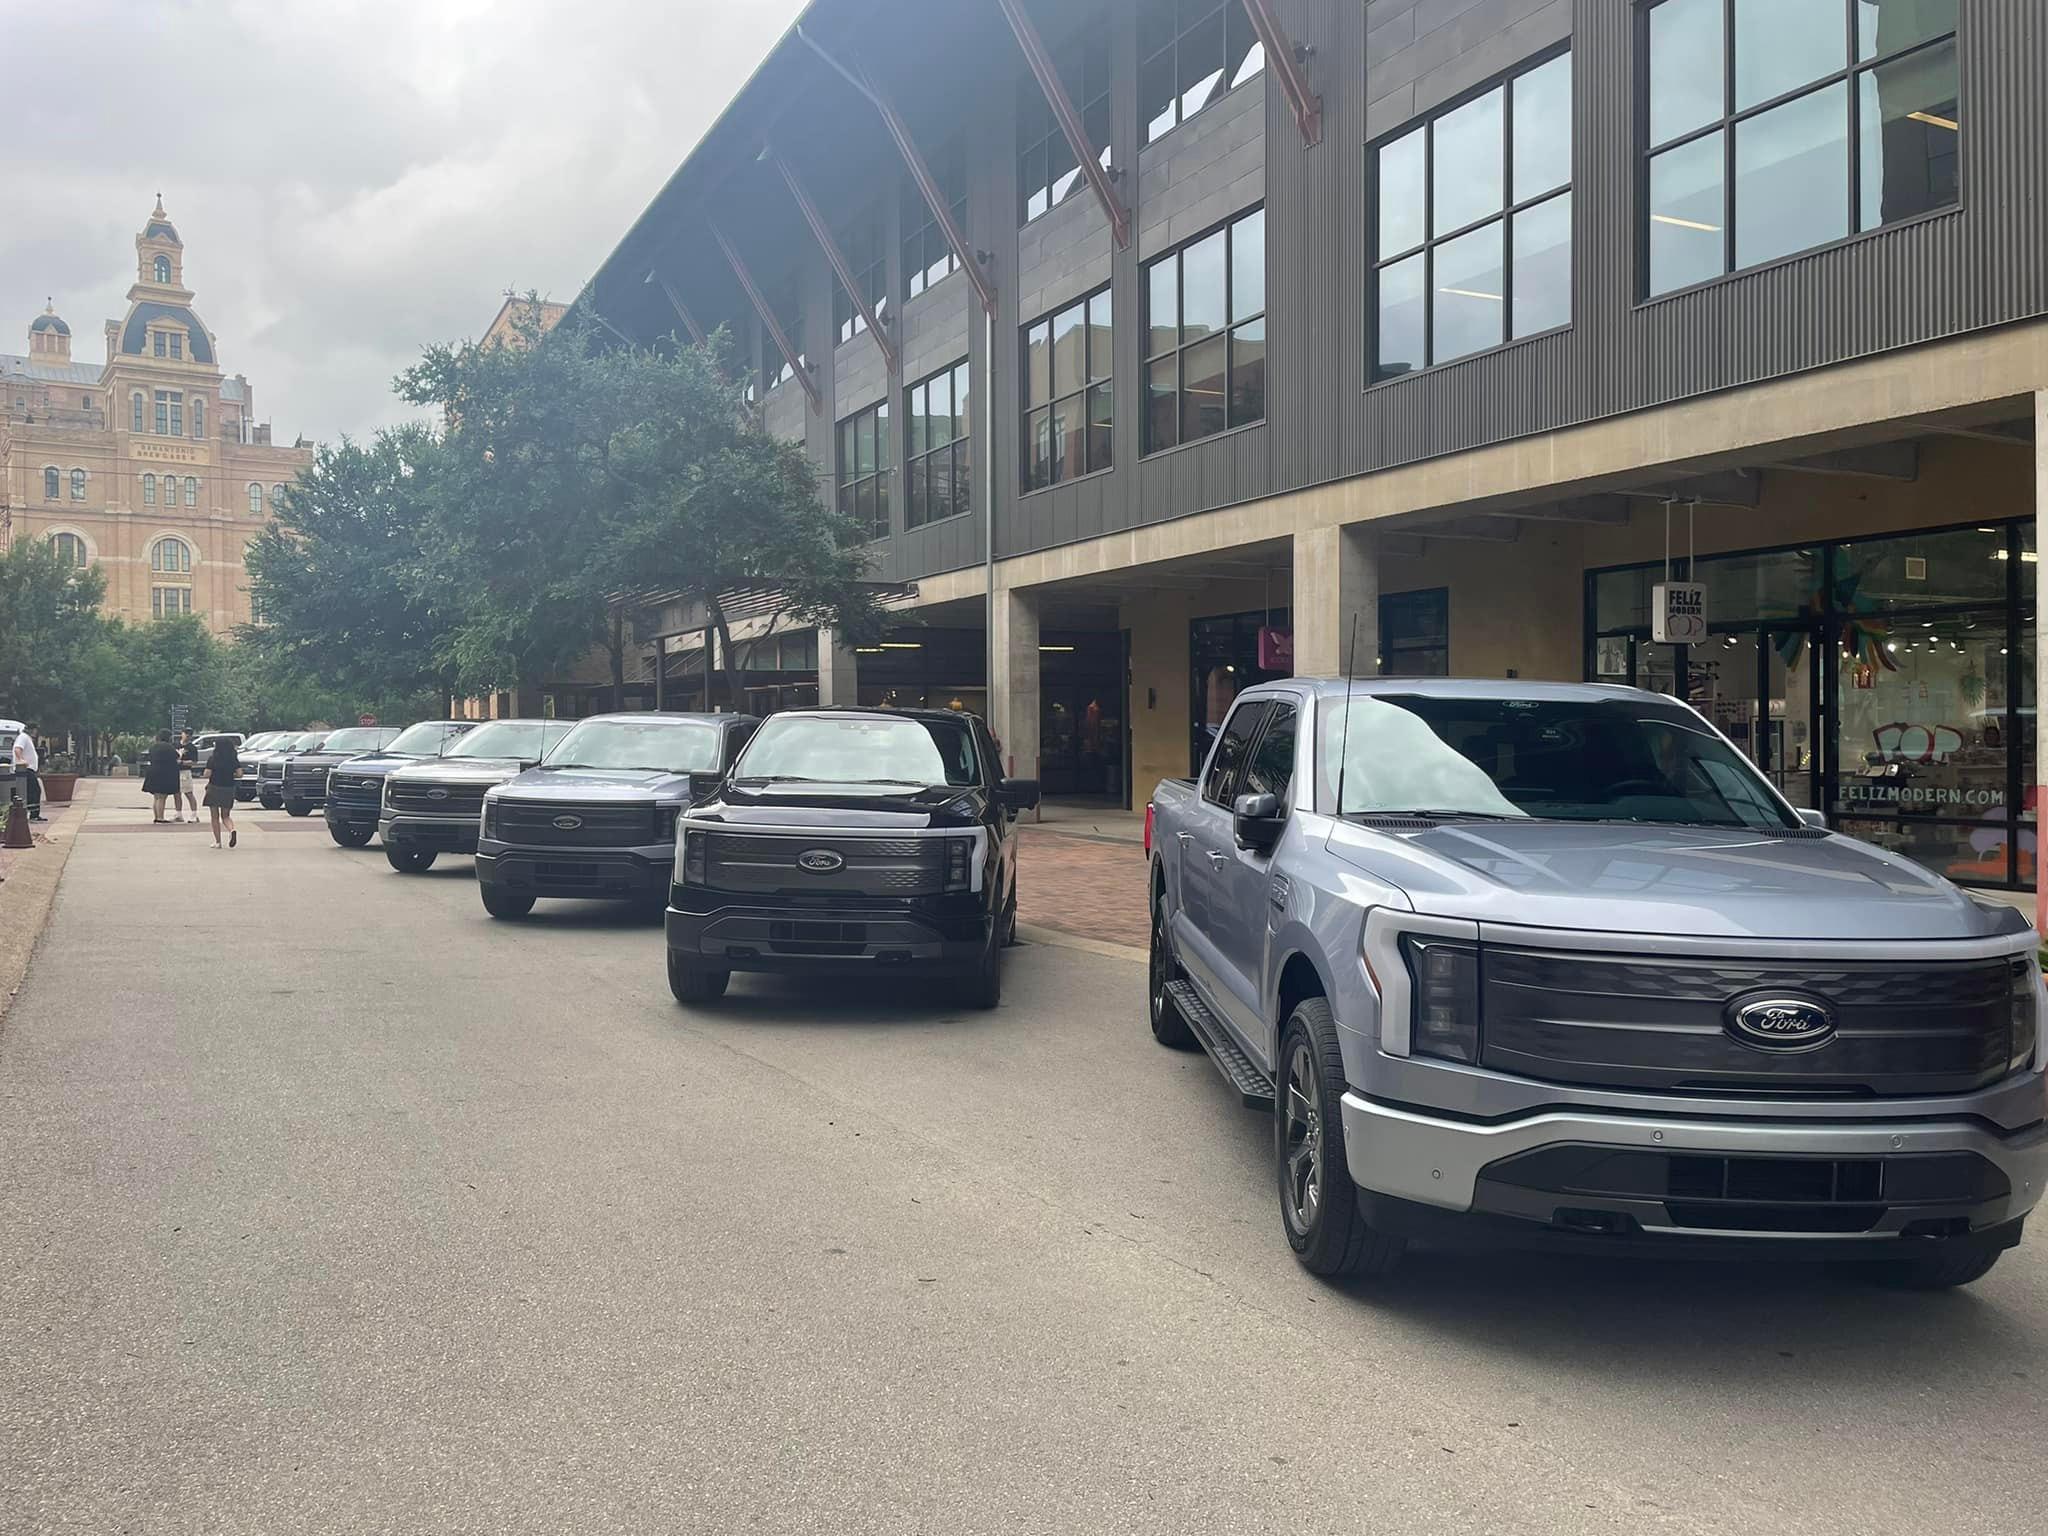 Ford F-150 Lightning Iced Blue Silver vs Iconic Silver F-150 Lightning Side-by-Side Comparison Photos F150 Lightning Iconic Silver vs Iced Blue Silver comparison vs side by side 2